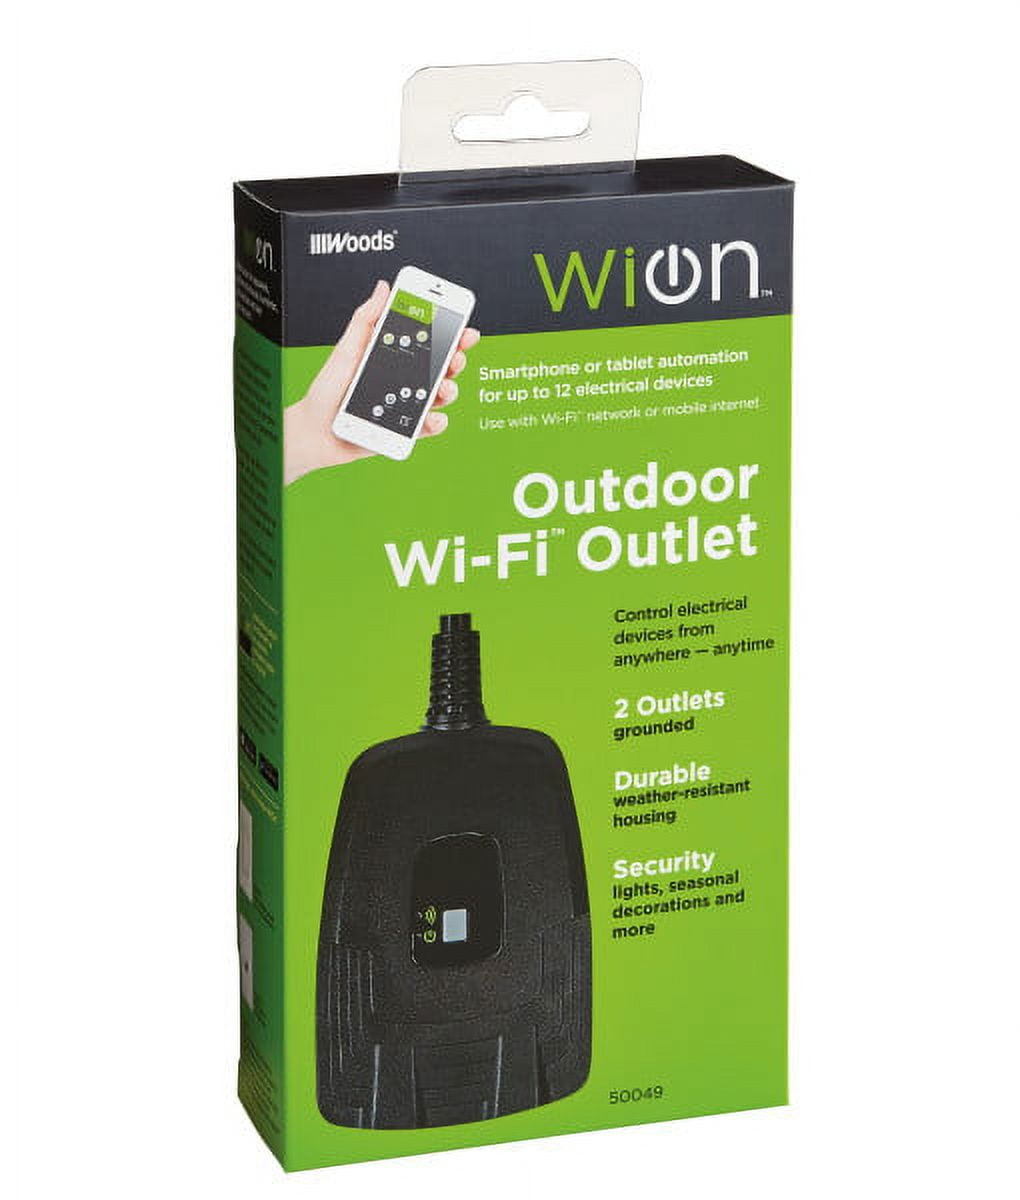 Home Depot] Indoor/Outdoor wifi Outlets - $13.48 - $16.20 (wion outlets)  ~70% off - RedFlagDeals.com Forums